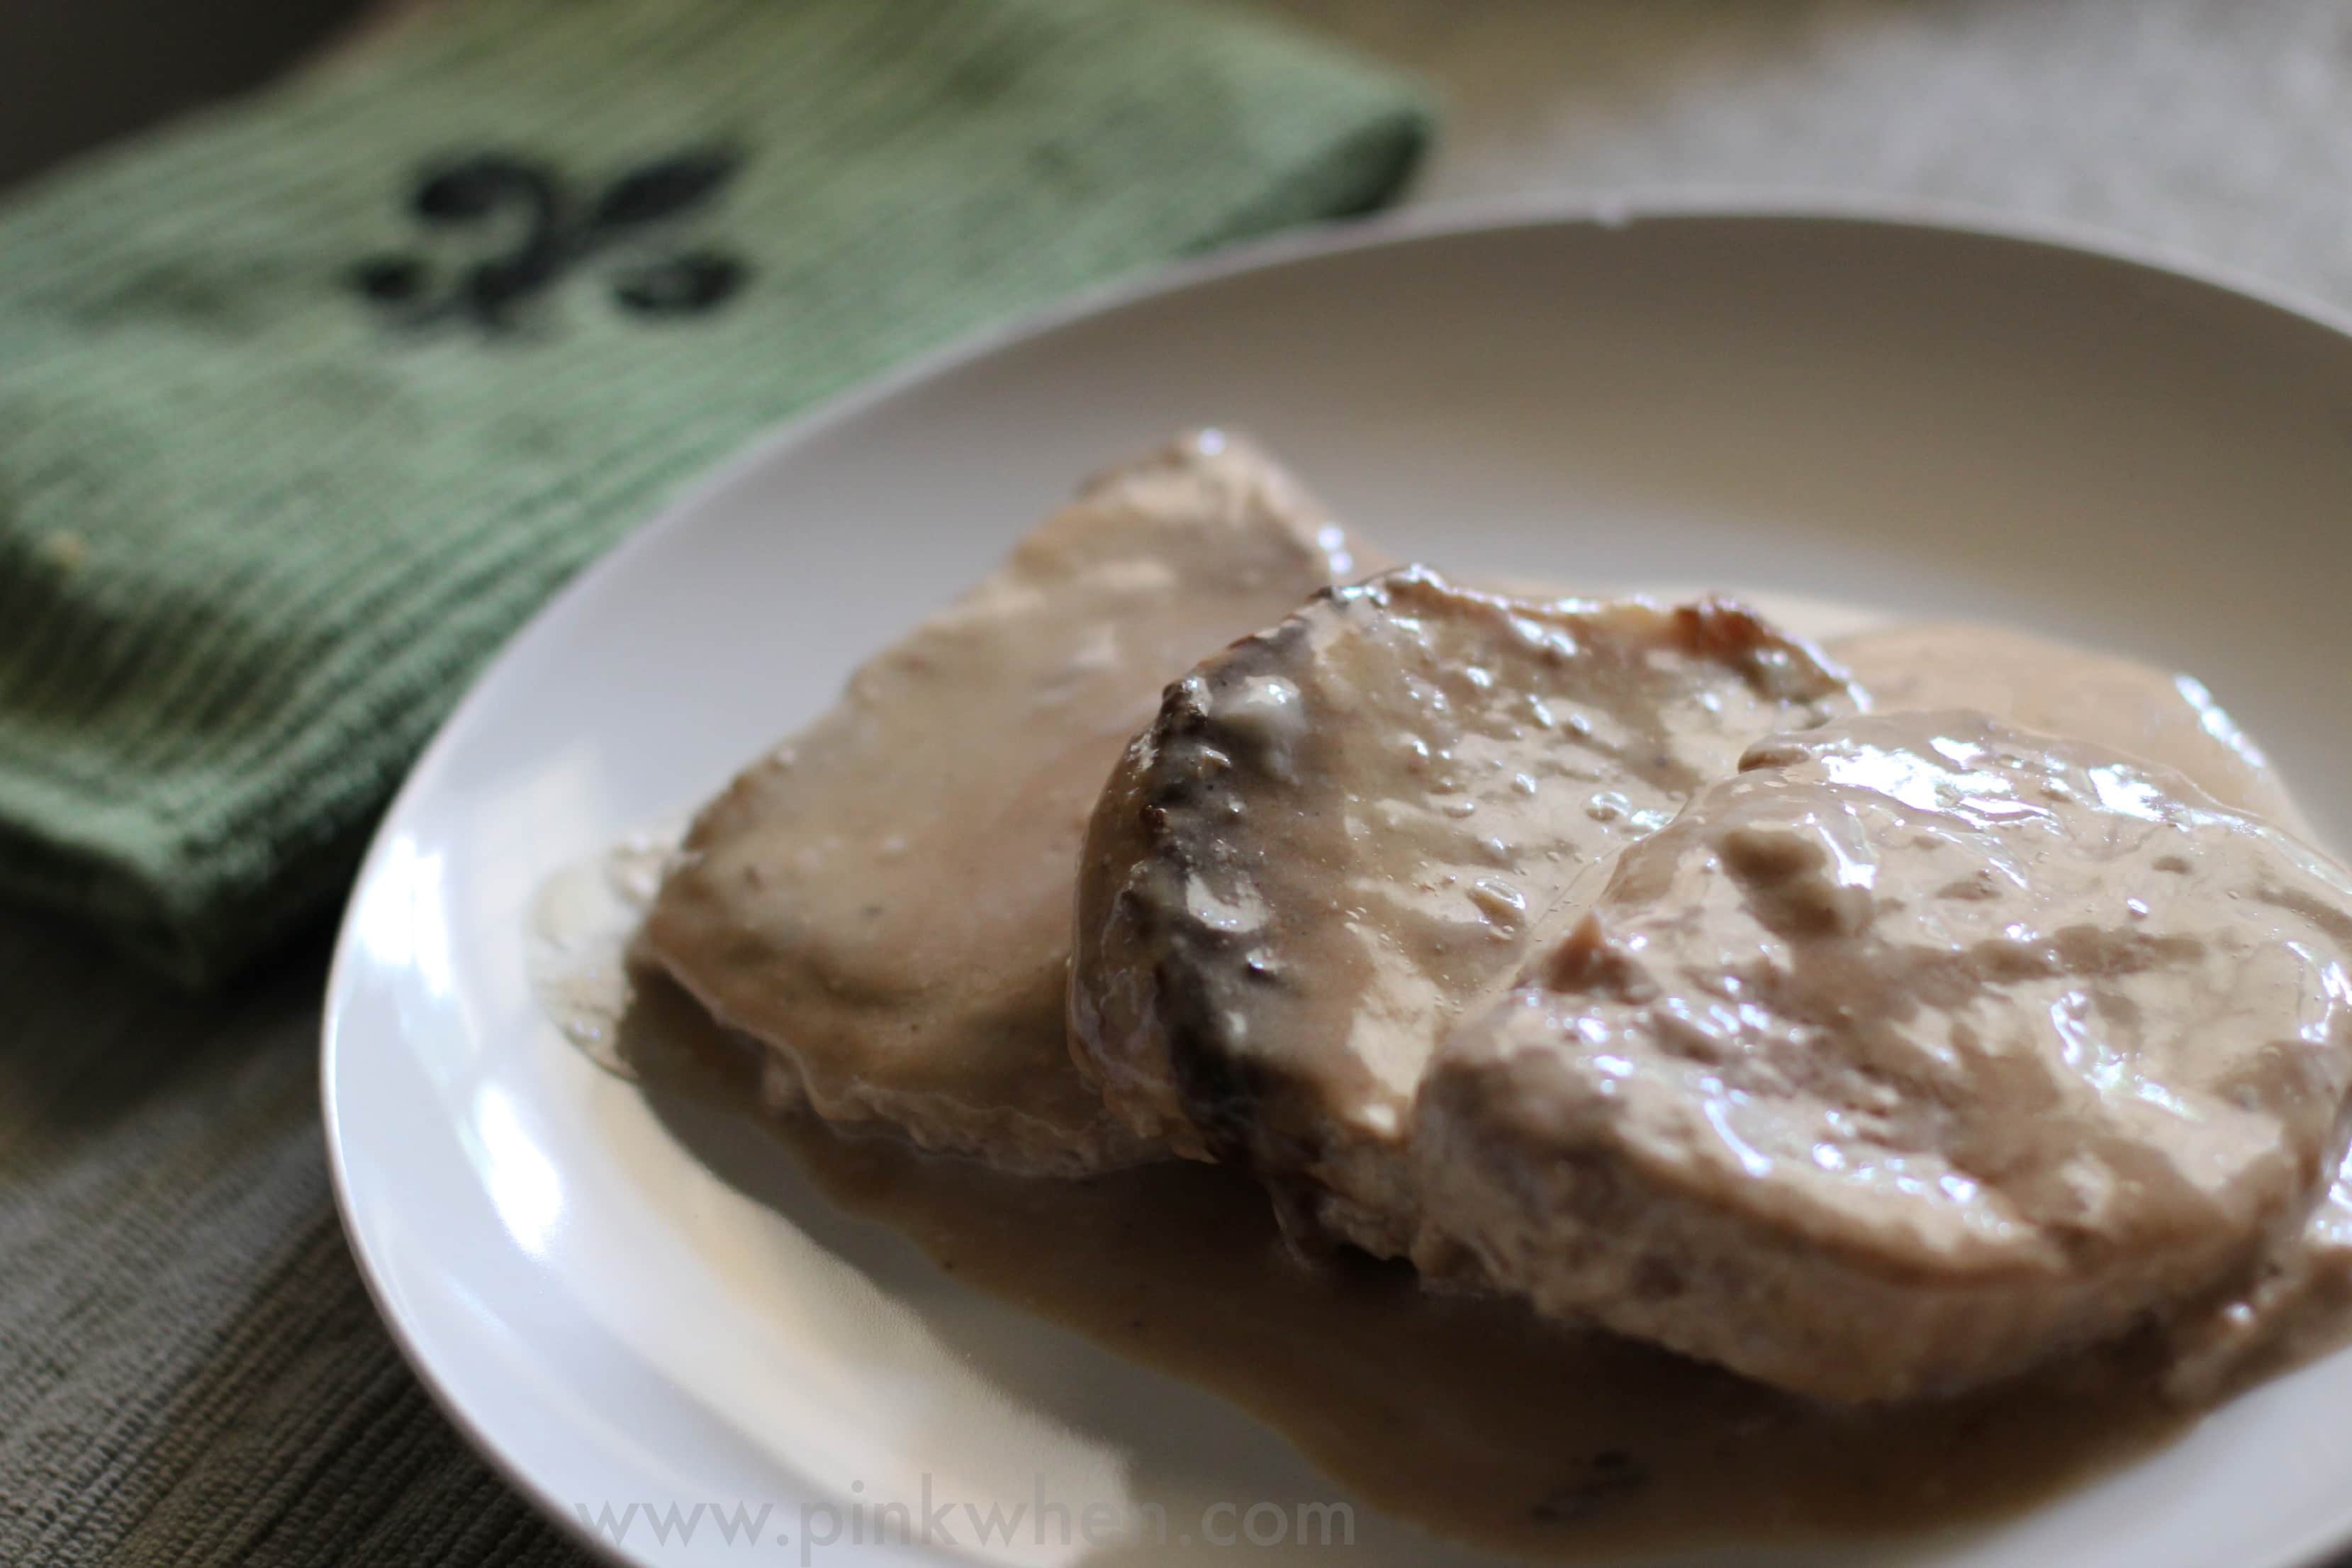 Slow Cooker Pork Chops and Gravy Recipe from PinkWhen.com